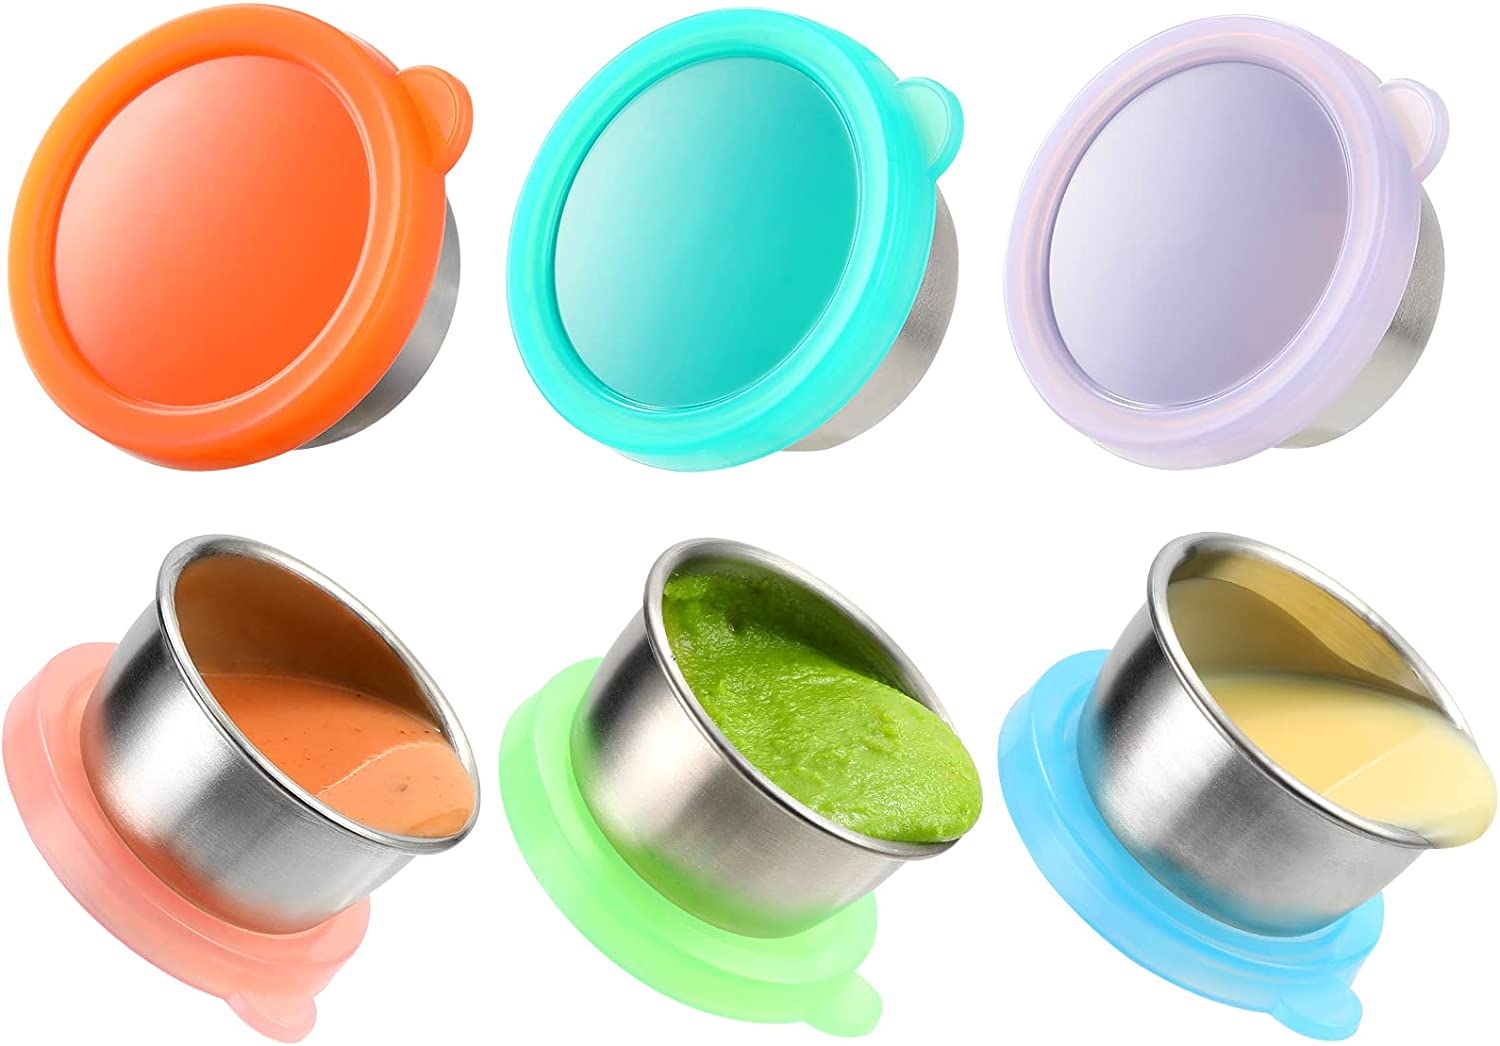 Condiment Cups Containers with Lids- 8 pk. 2.3 oz.Salad Dressing Container  to go Small Food Storage Containers with Lids- Sauce Cups Leak proof